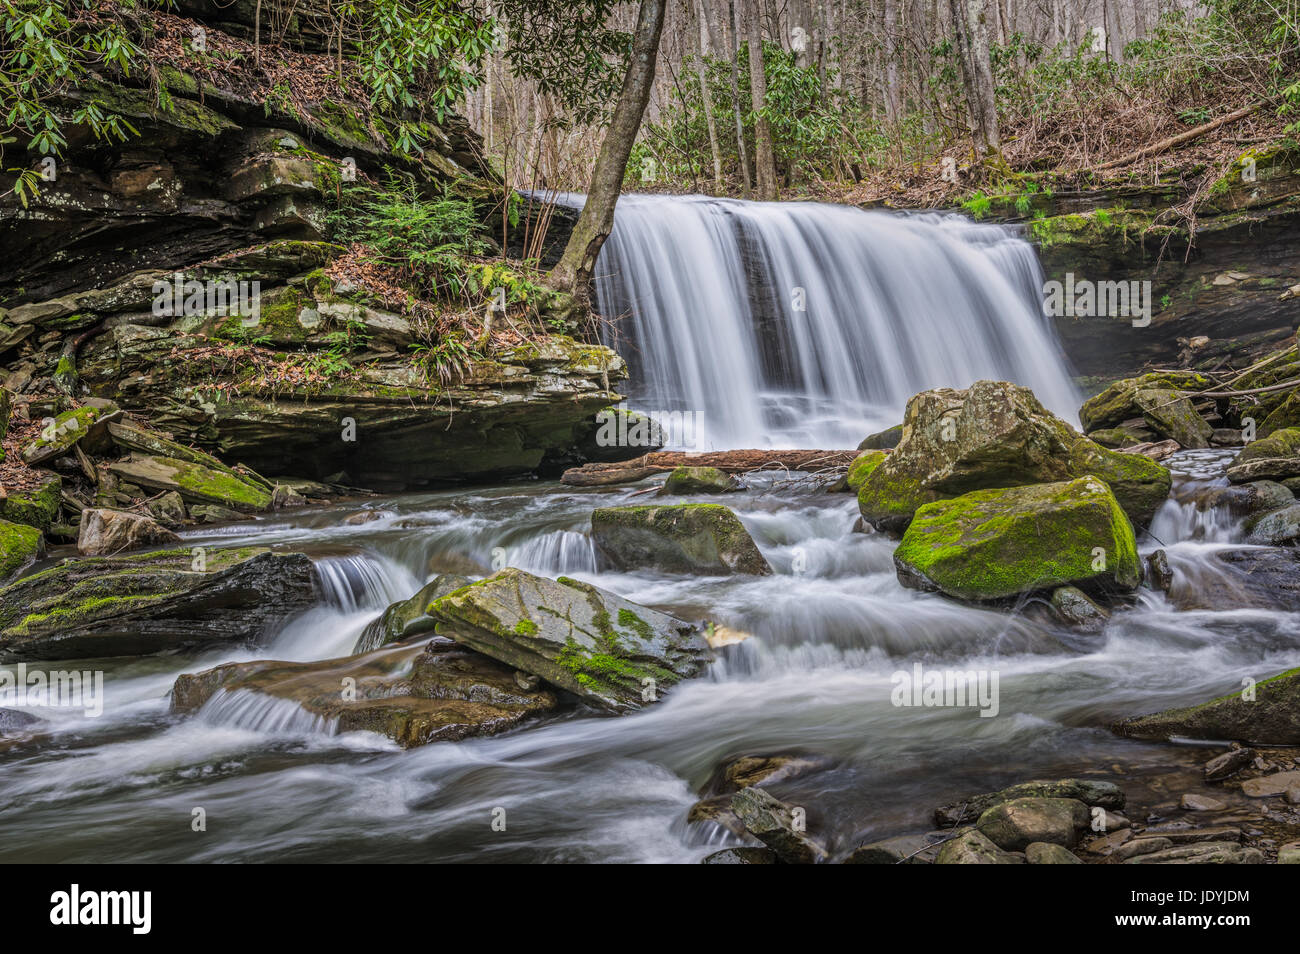 This waterfall is one of many large drops found on Arbuckle Creek in the New River Gorge of West Virginia. Stock Photo